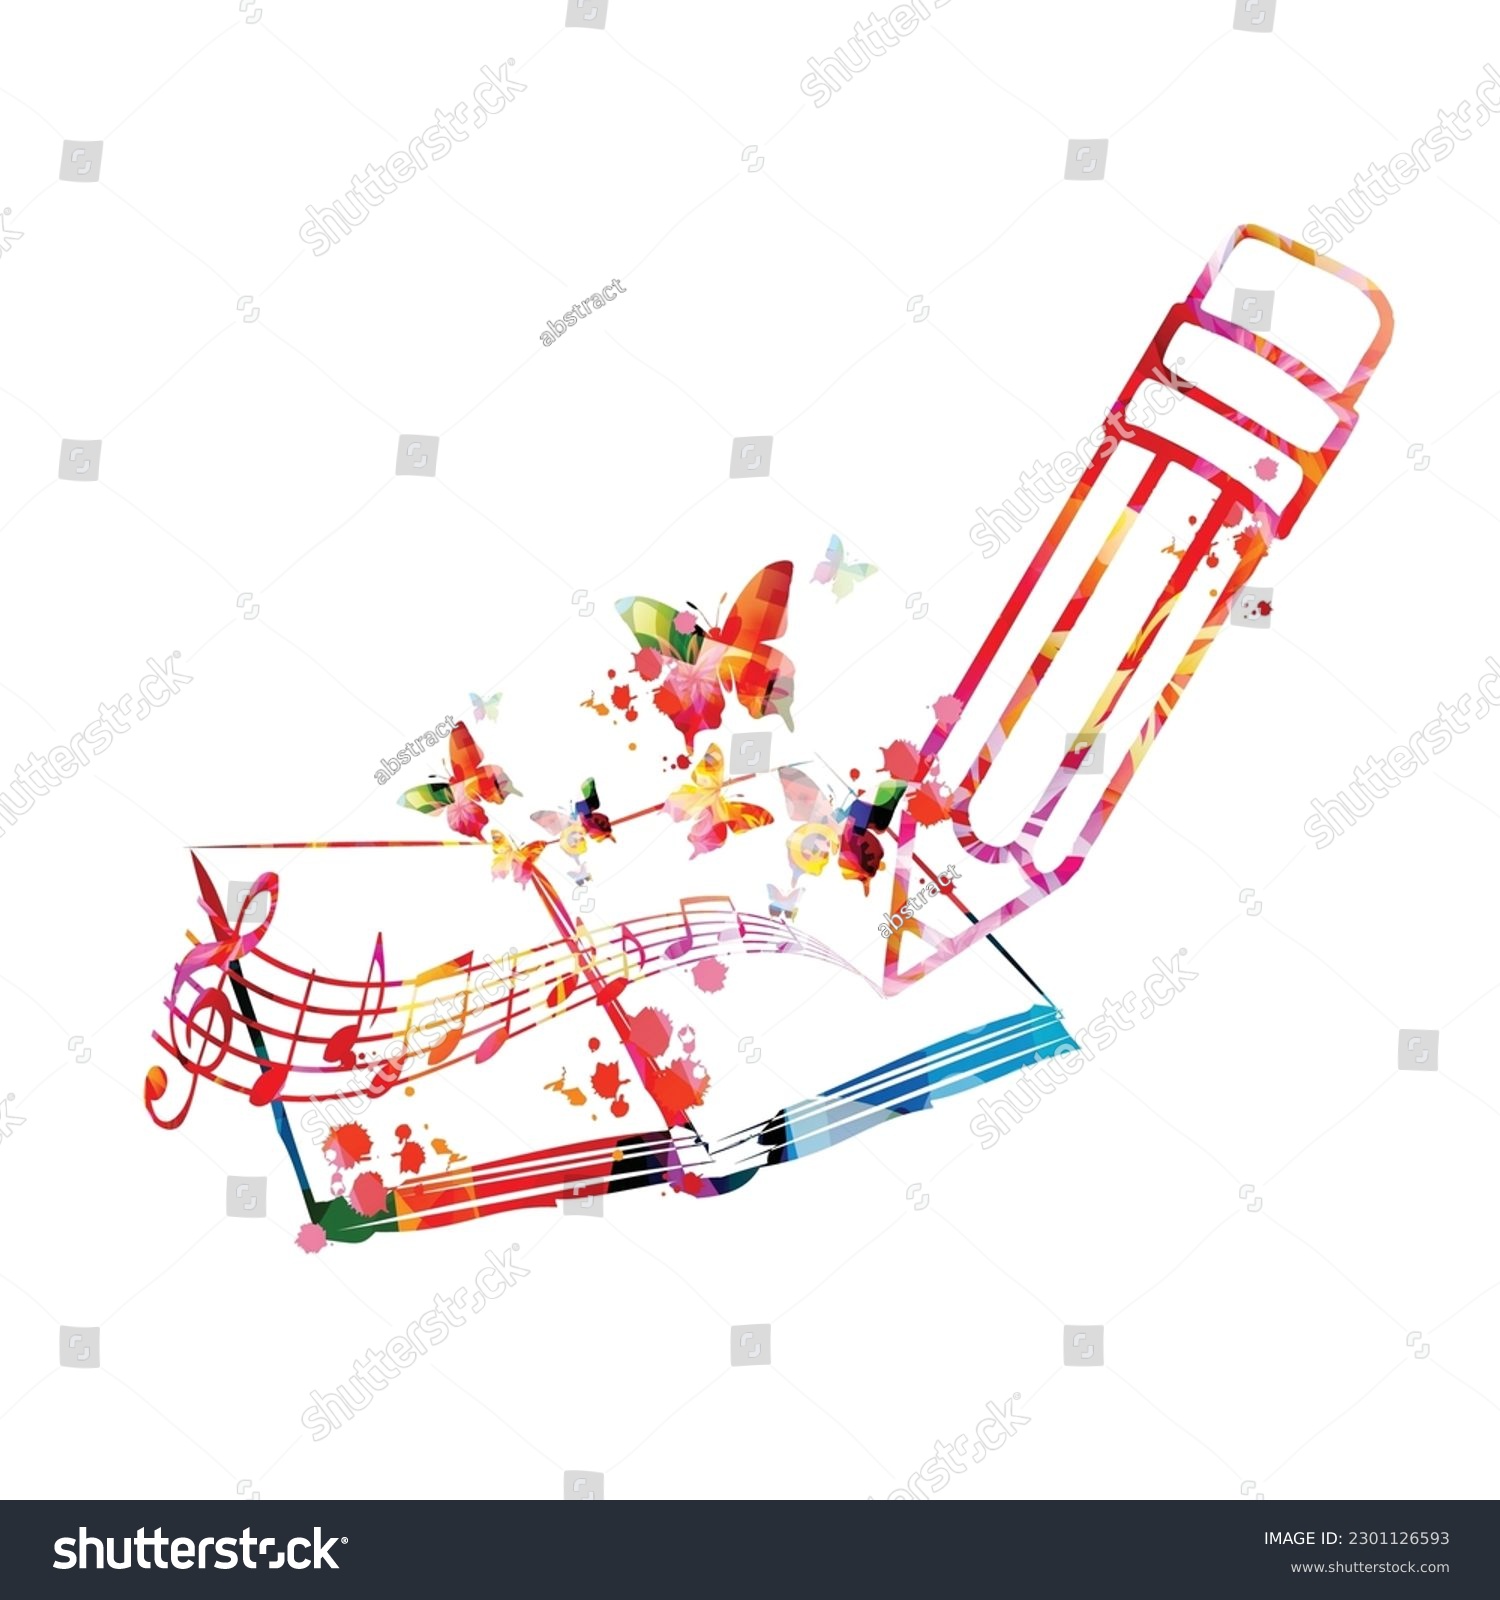 SVG of Songwriting book, writing a hit song techniques, creating music. Vector illustration of pencil, book and musical notes staff isolated. Composing song design. Background for conservatory or art school svg